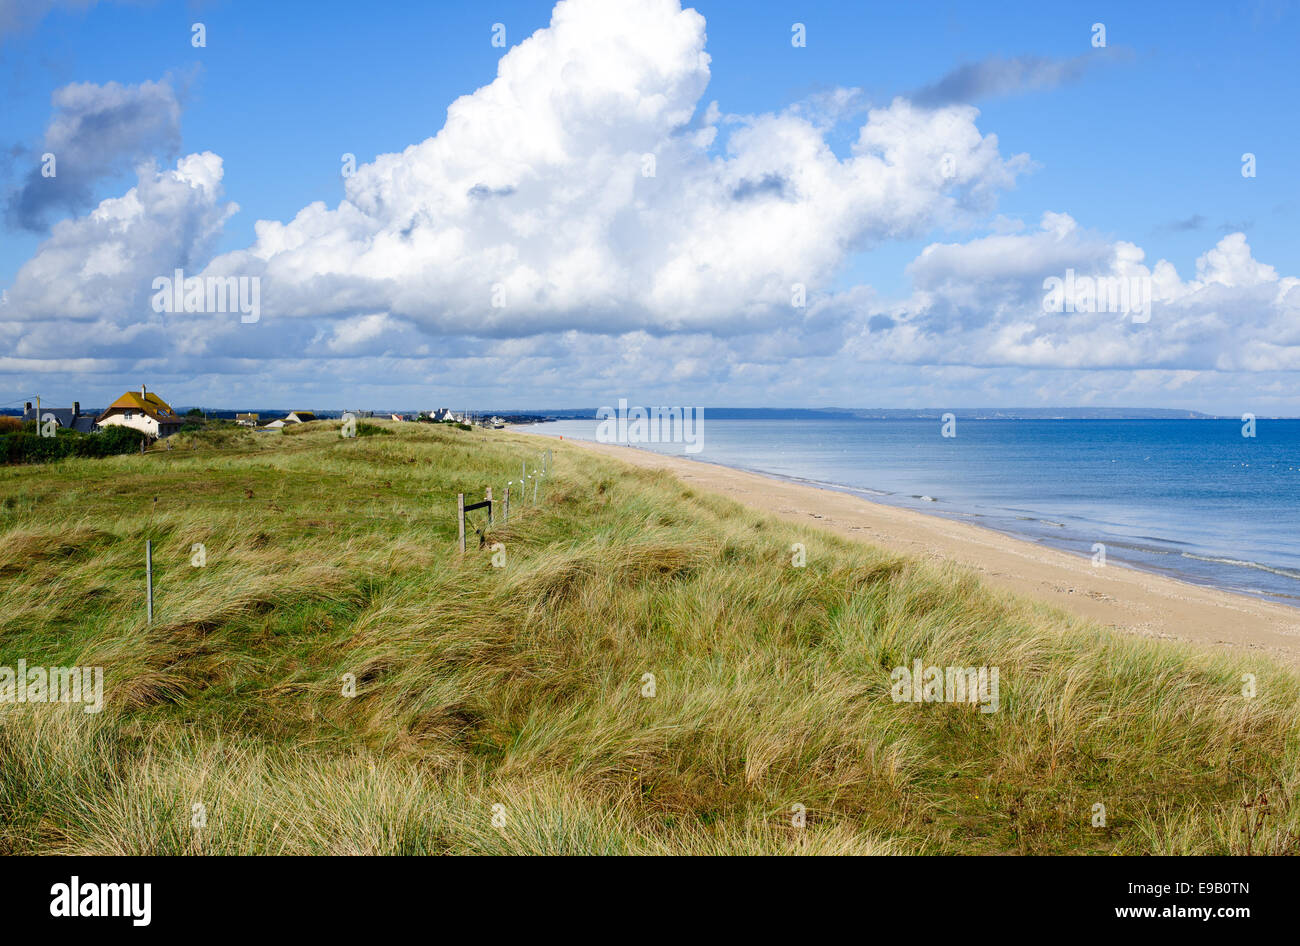 Utah Beach is one of the five Landing beaches in the Normandy landings on 6 June 1944, during World War II. D-day Stock Photo